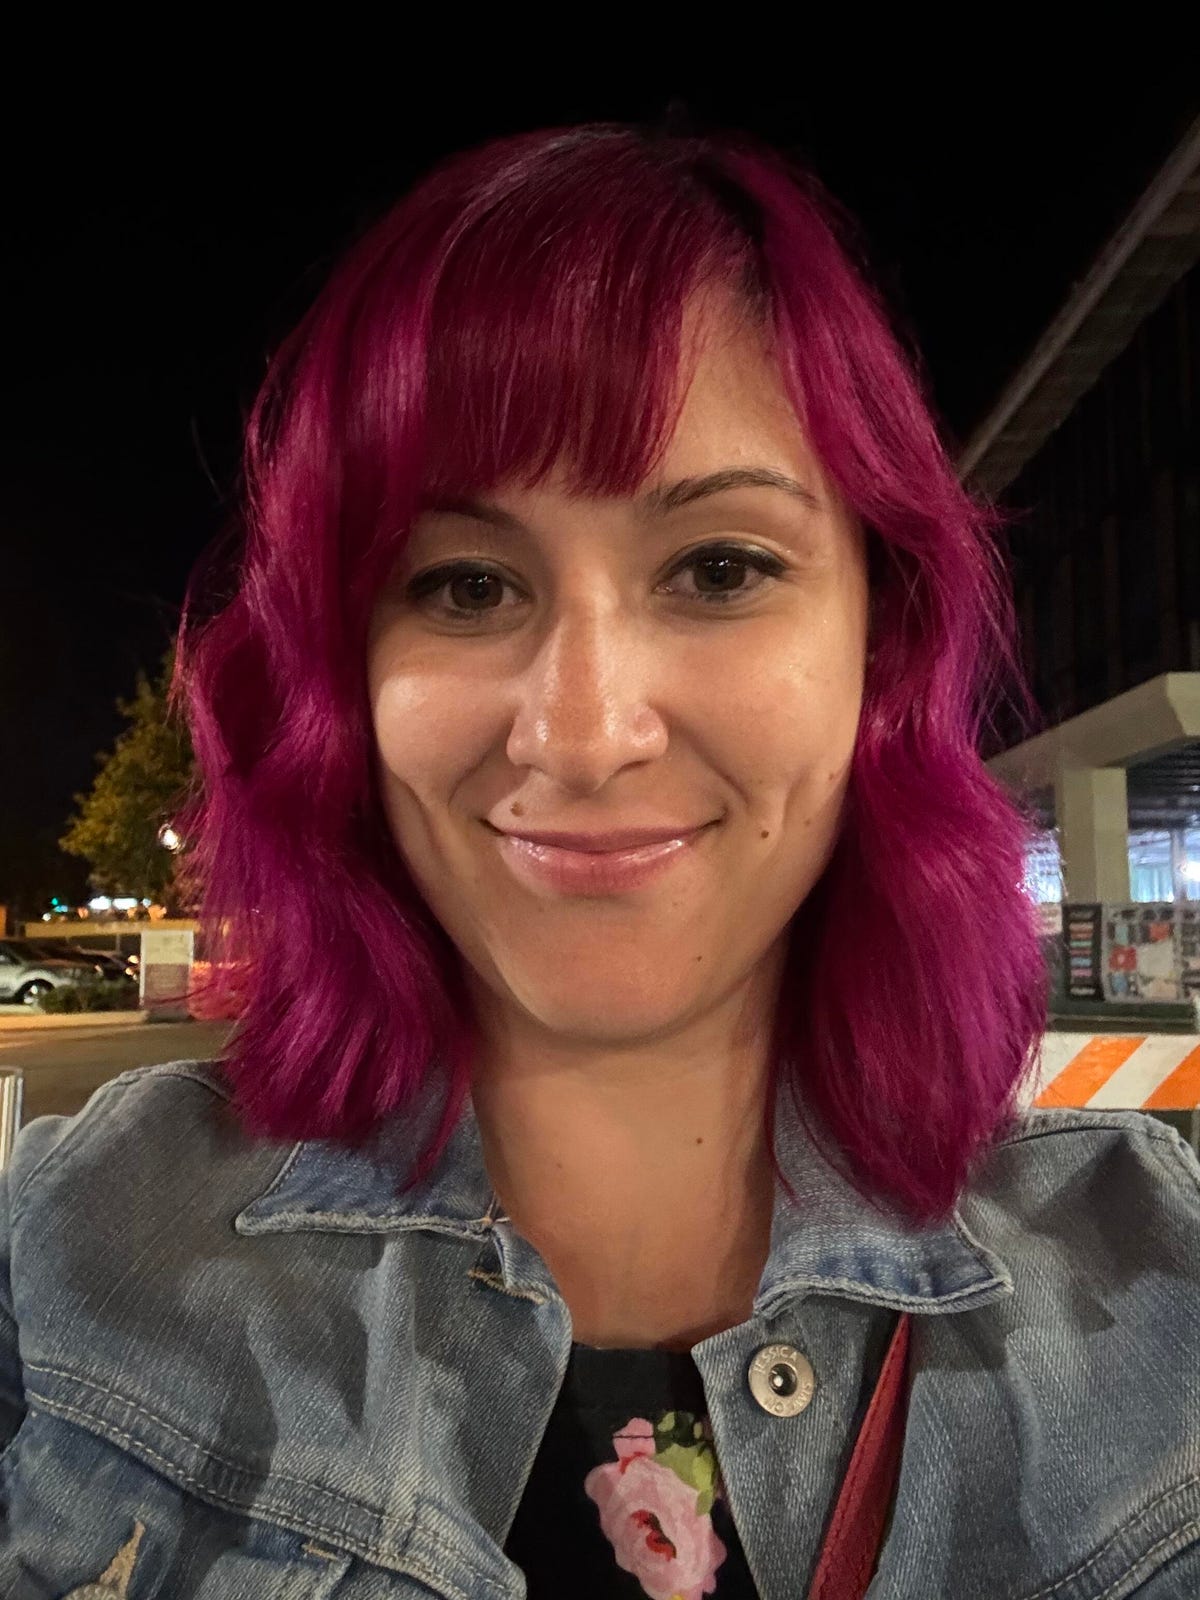 A photo of a woman with pink hair taken on the iPhone 15.